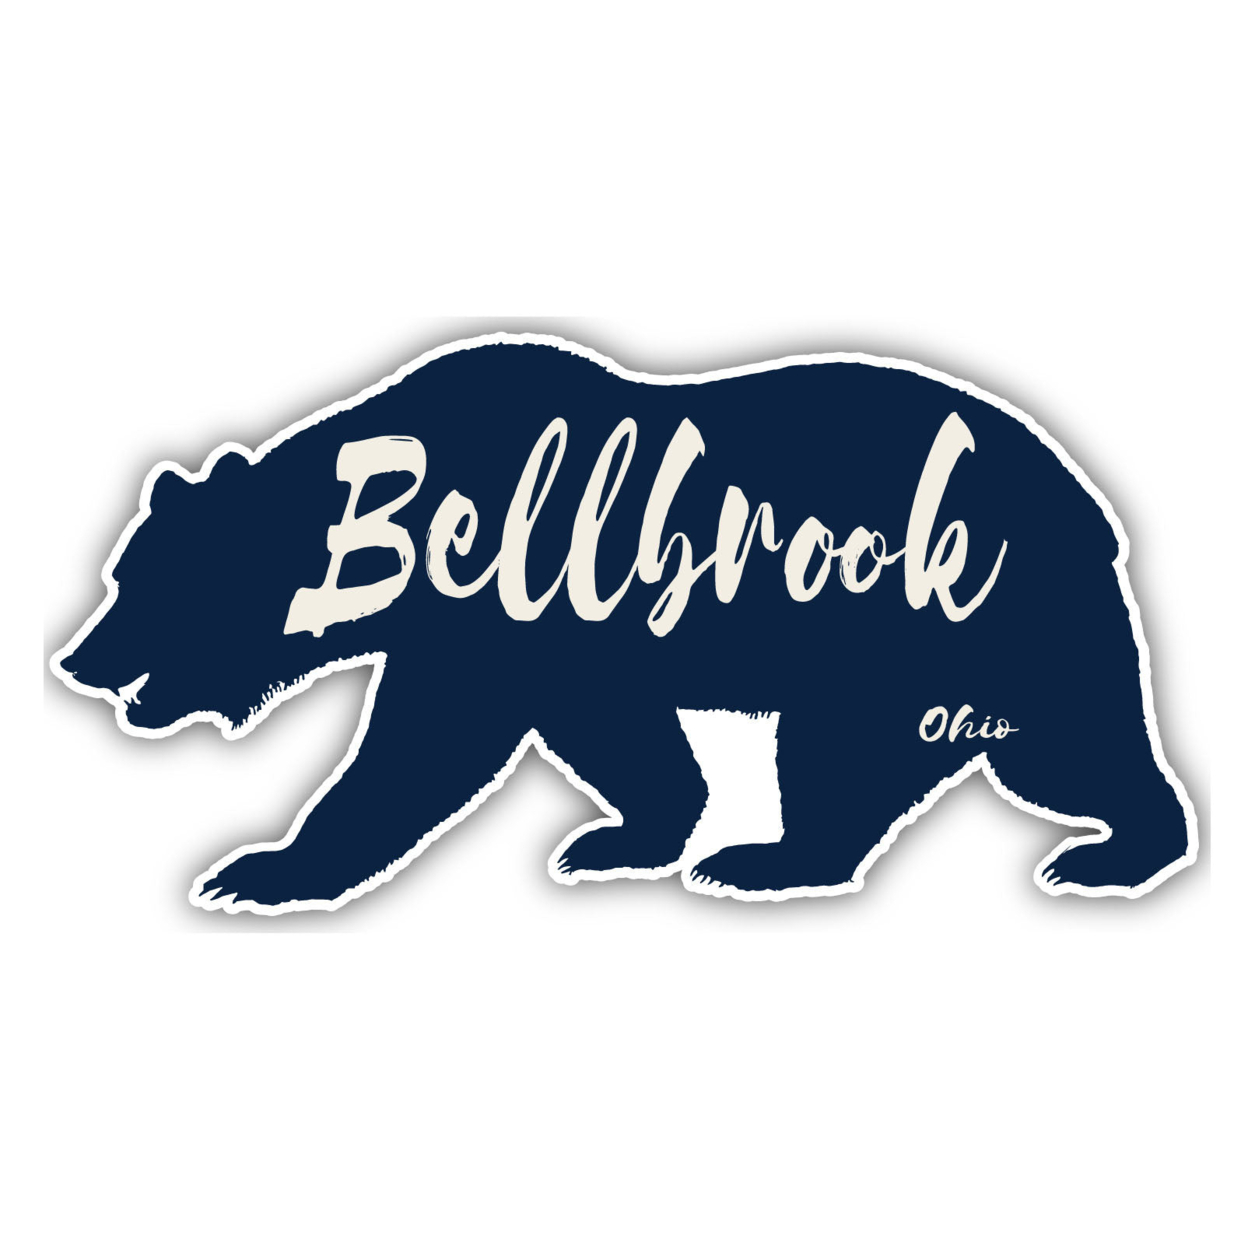 Bellbrook Ohio Souvenir Decorative Stickers (Choose Theme And Size) - 4-Pack, 4-Inch, Bear